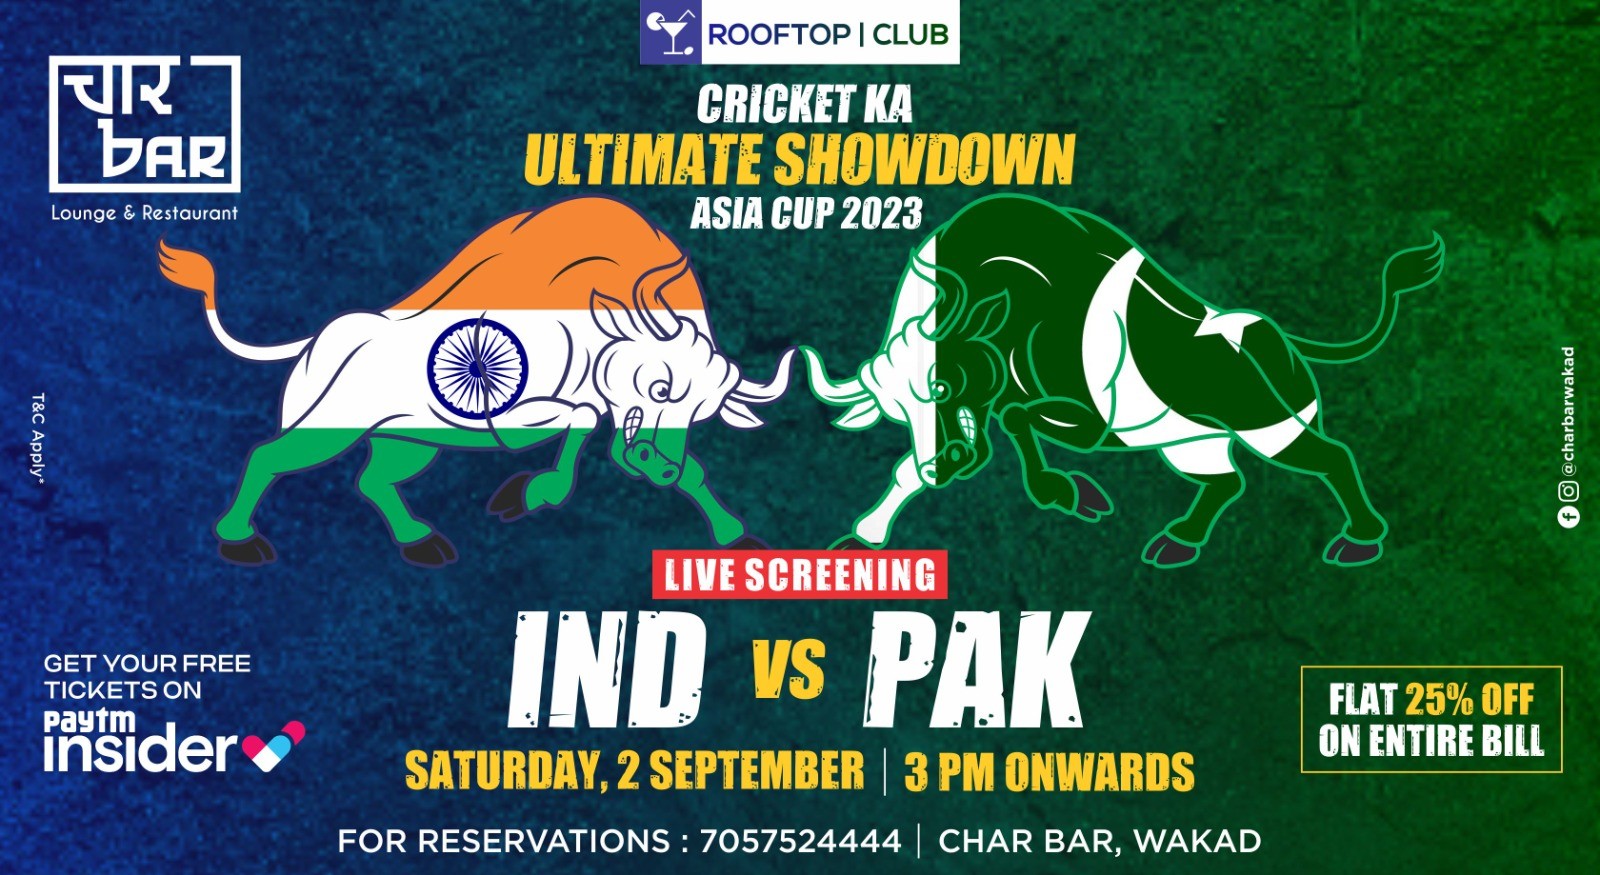 Asia Cup 2023 schedule: India vs Pakistan on September 2 in Kandy